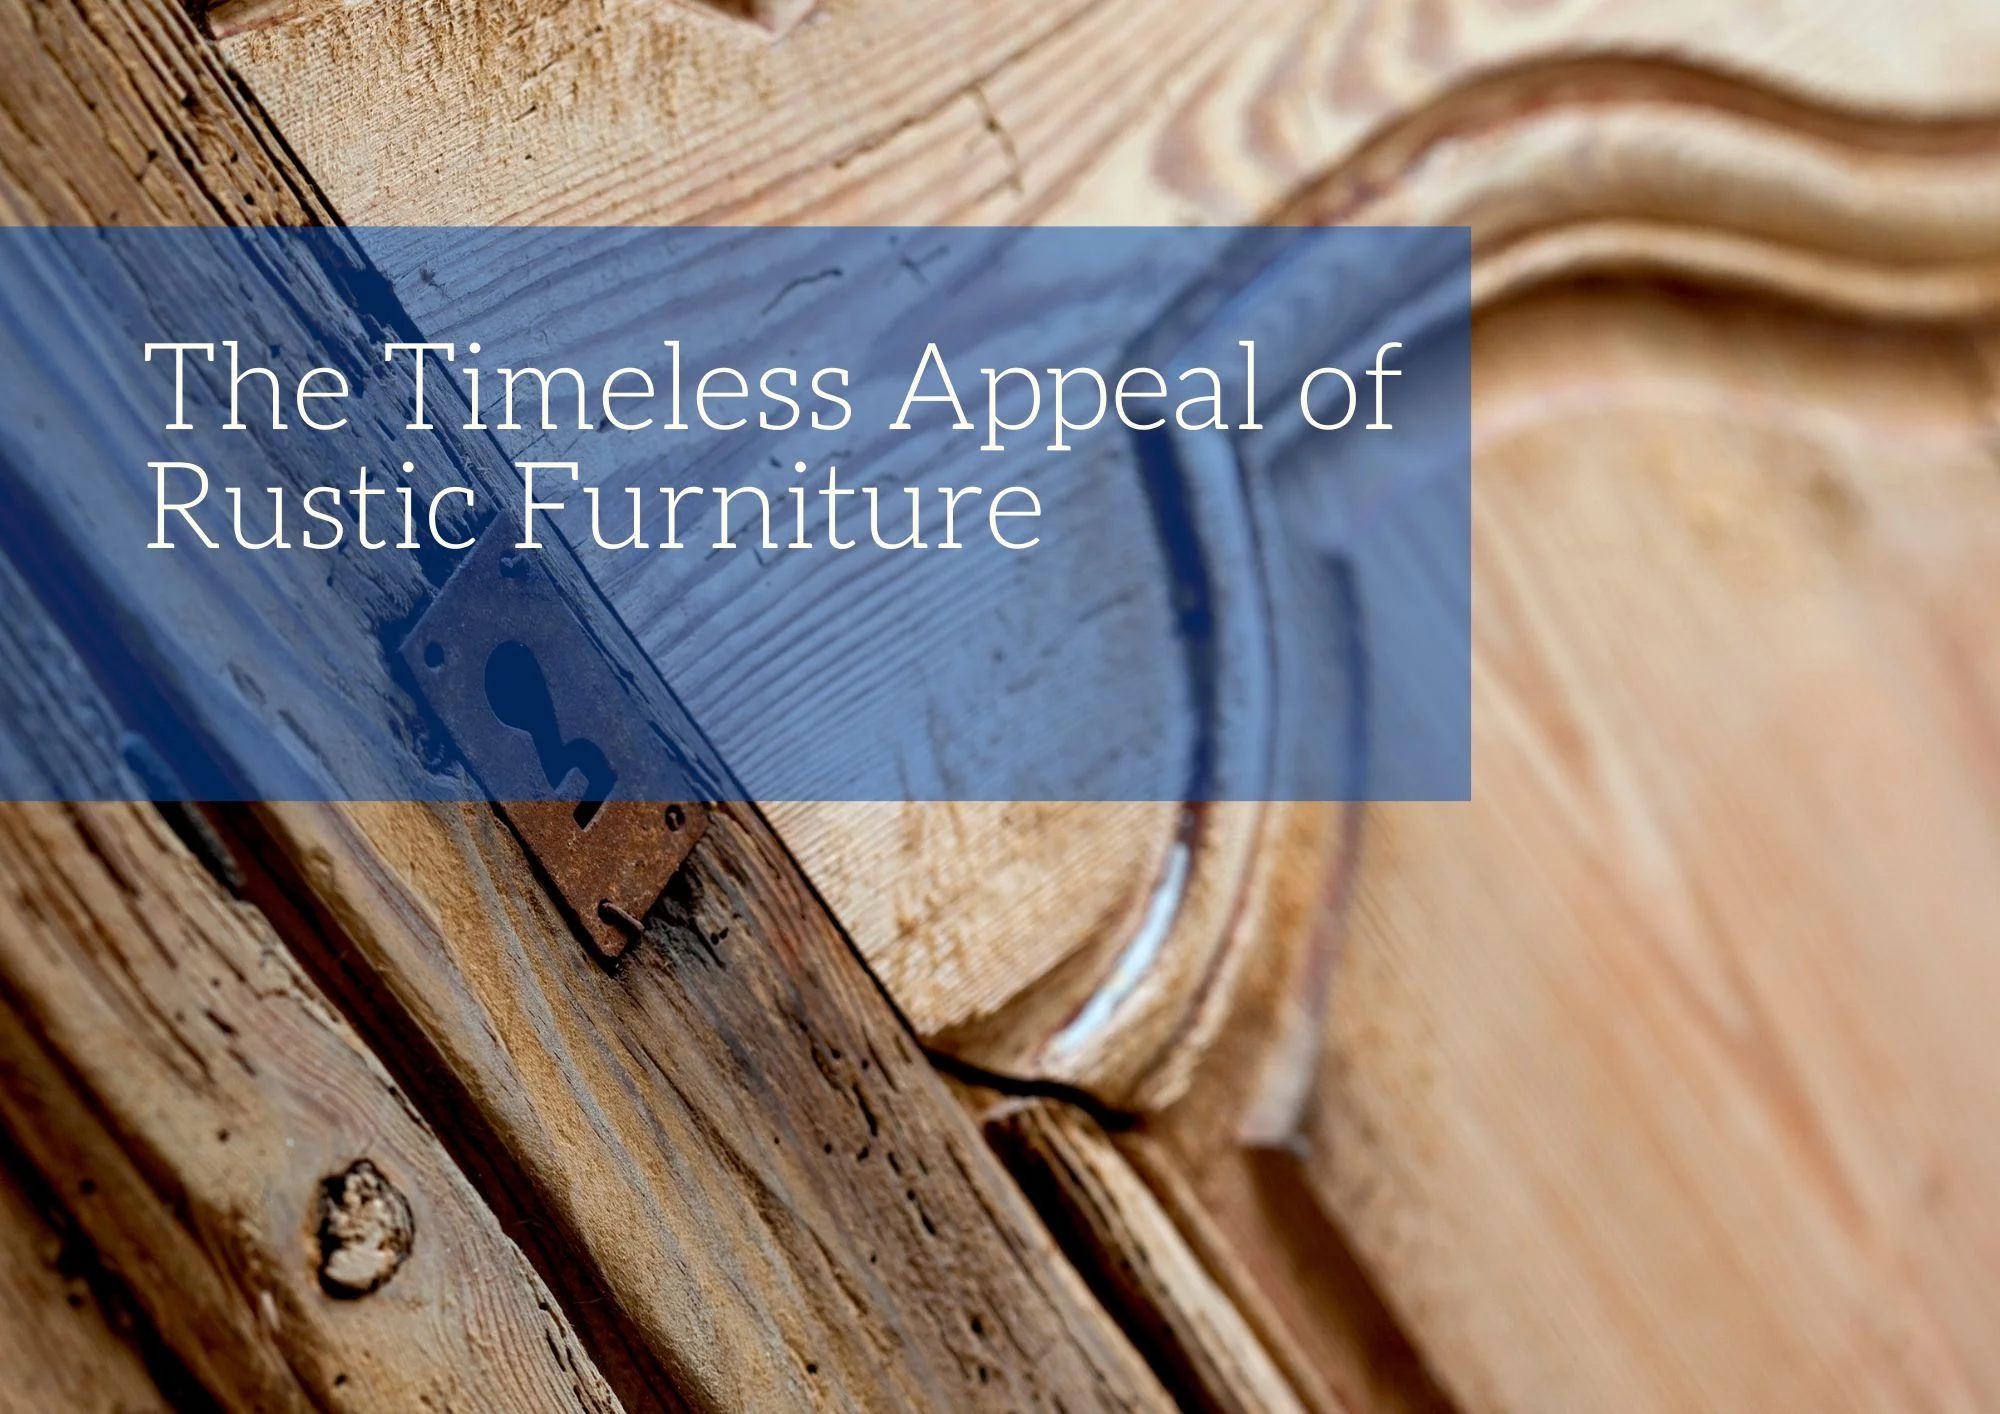 The Timeless Appeal of Rustic Furniture